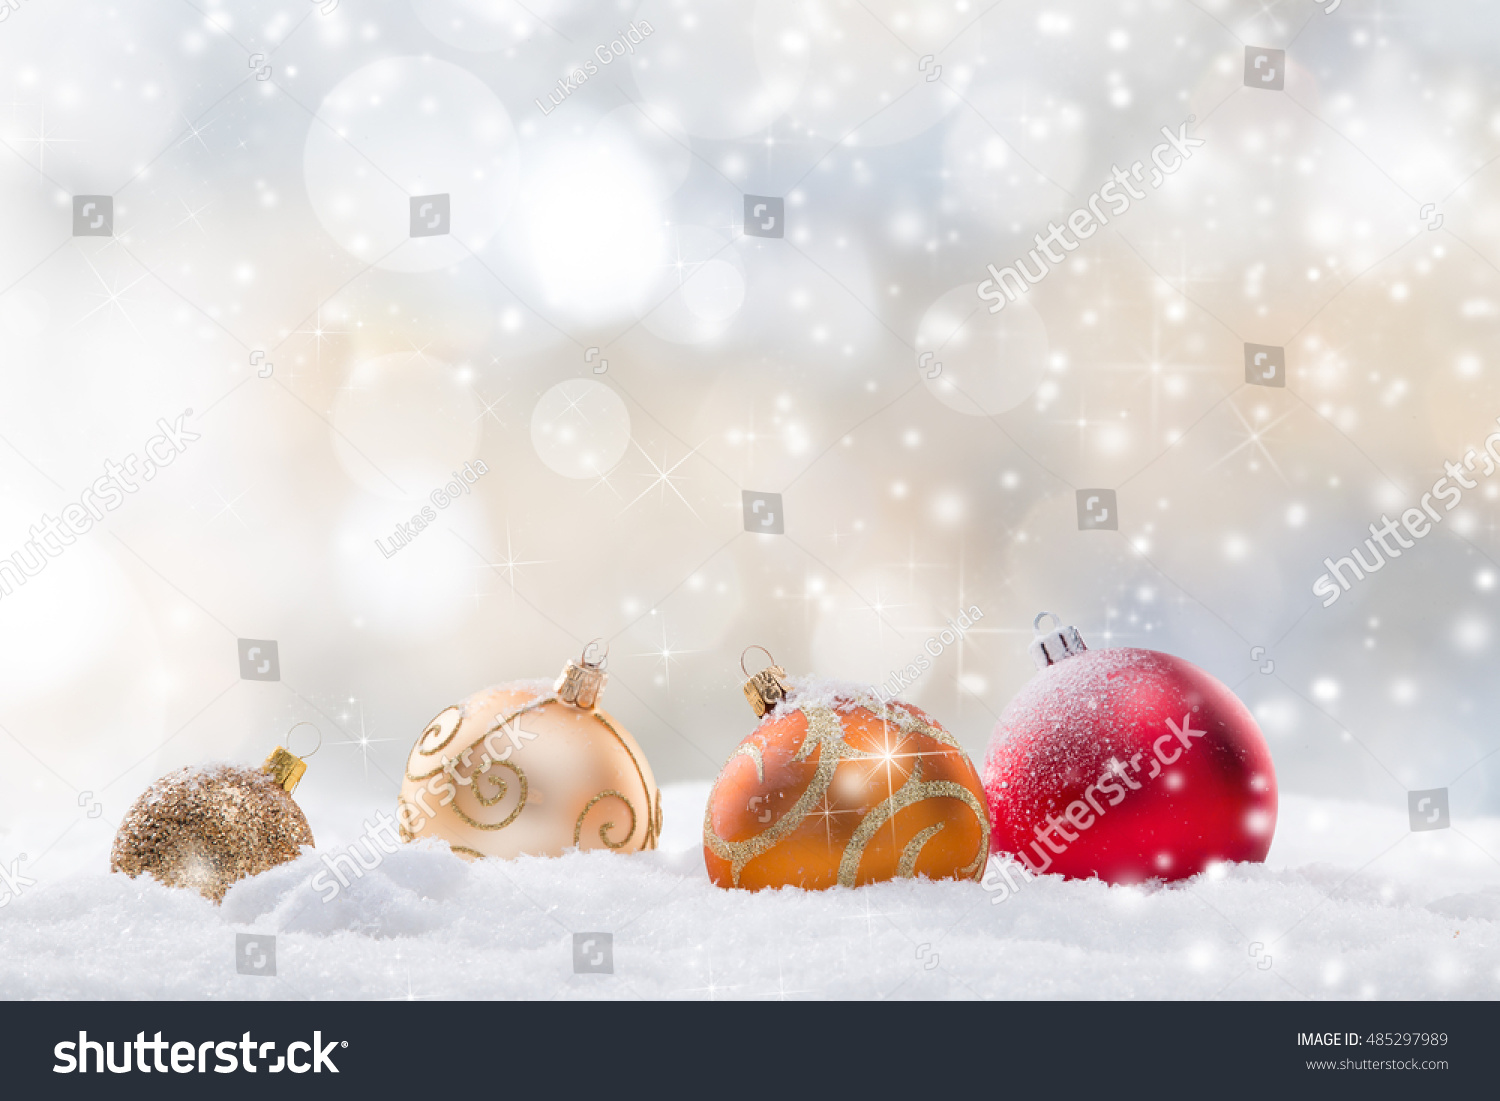 Abstract Christmas background #485297989